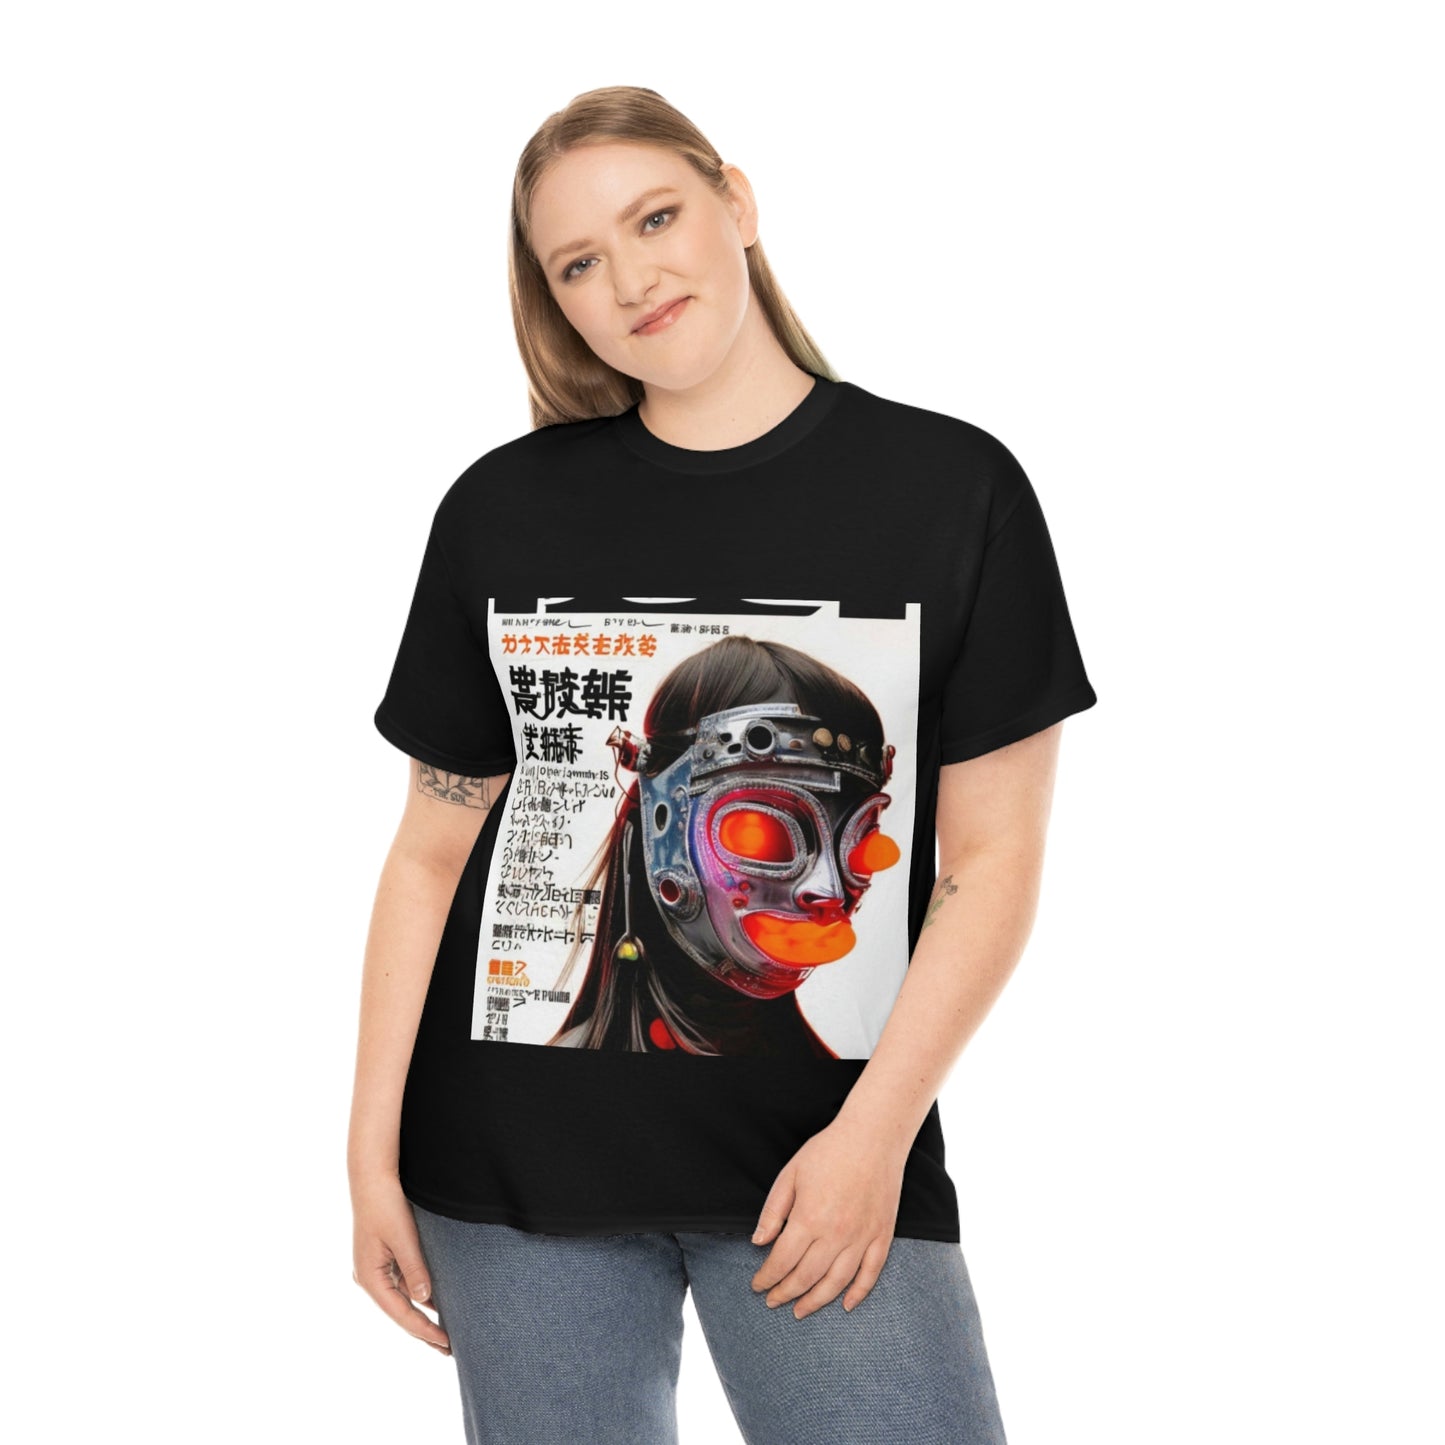 Have Trouble With - Indigenous Dystopian Warrior  T-Shirt Collection